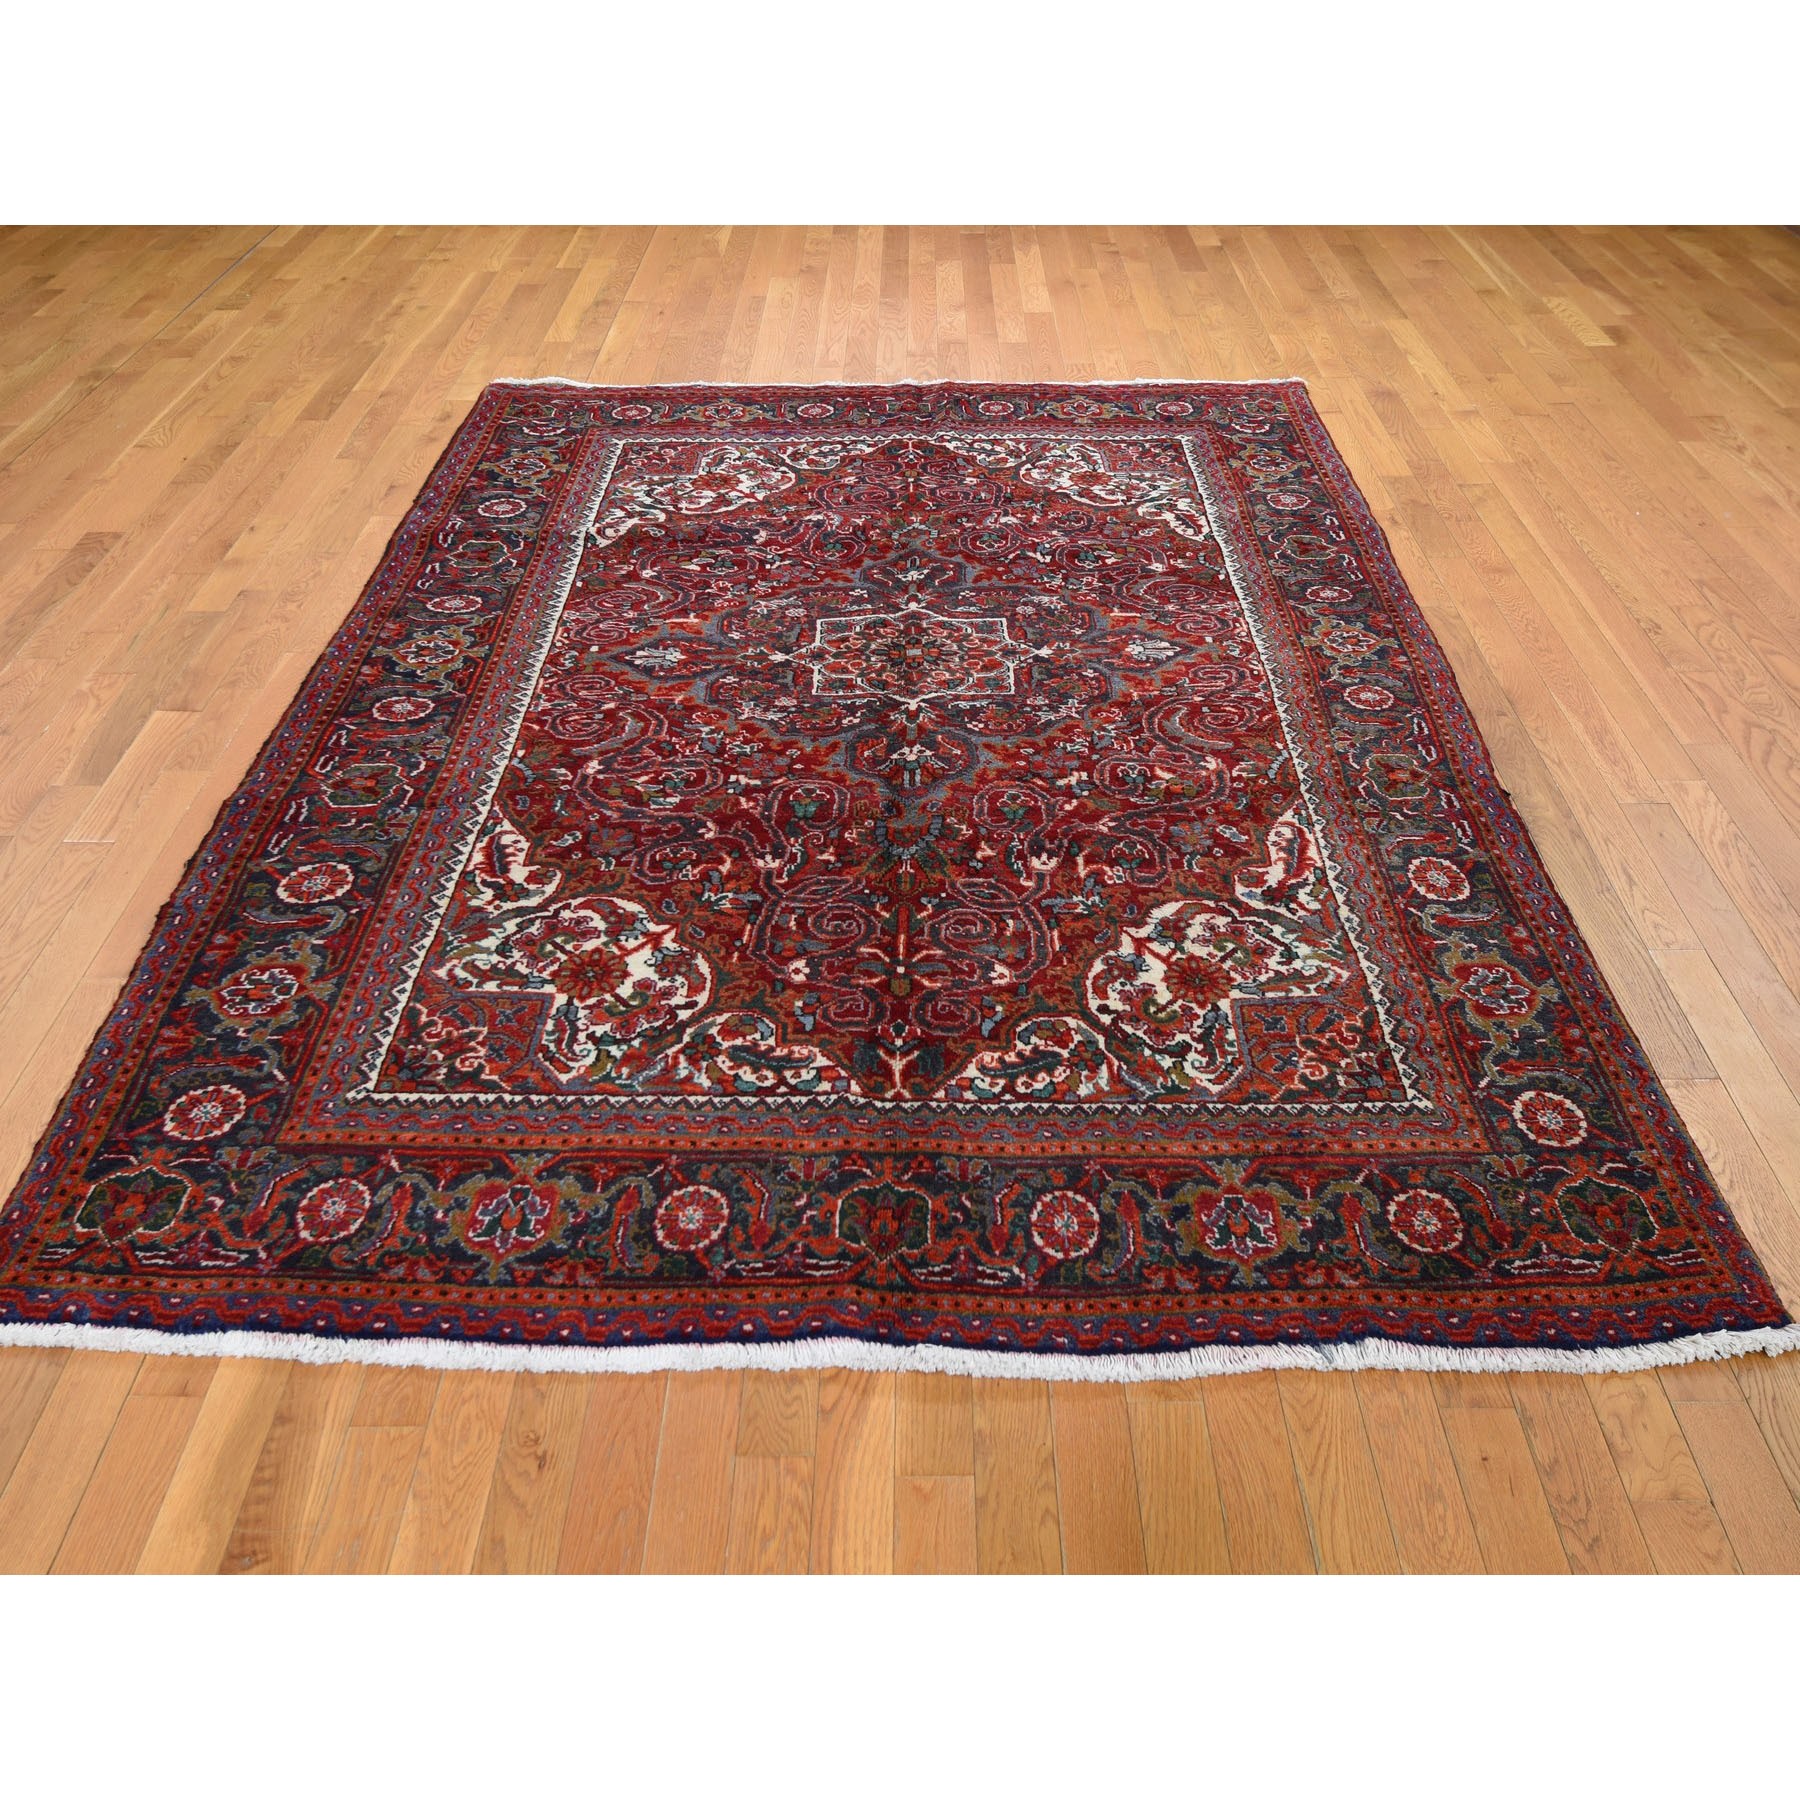 6-10 x9-8  Red Semi Antique Persian Heriz Flower Design Thick and Plush Hand Knotted Oriental Rug 